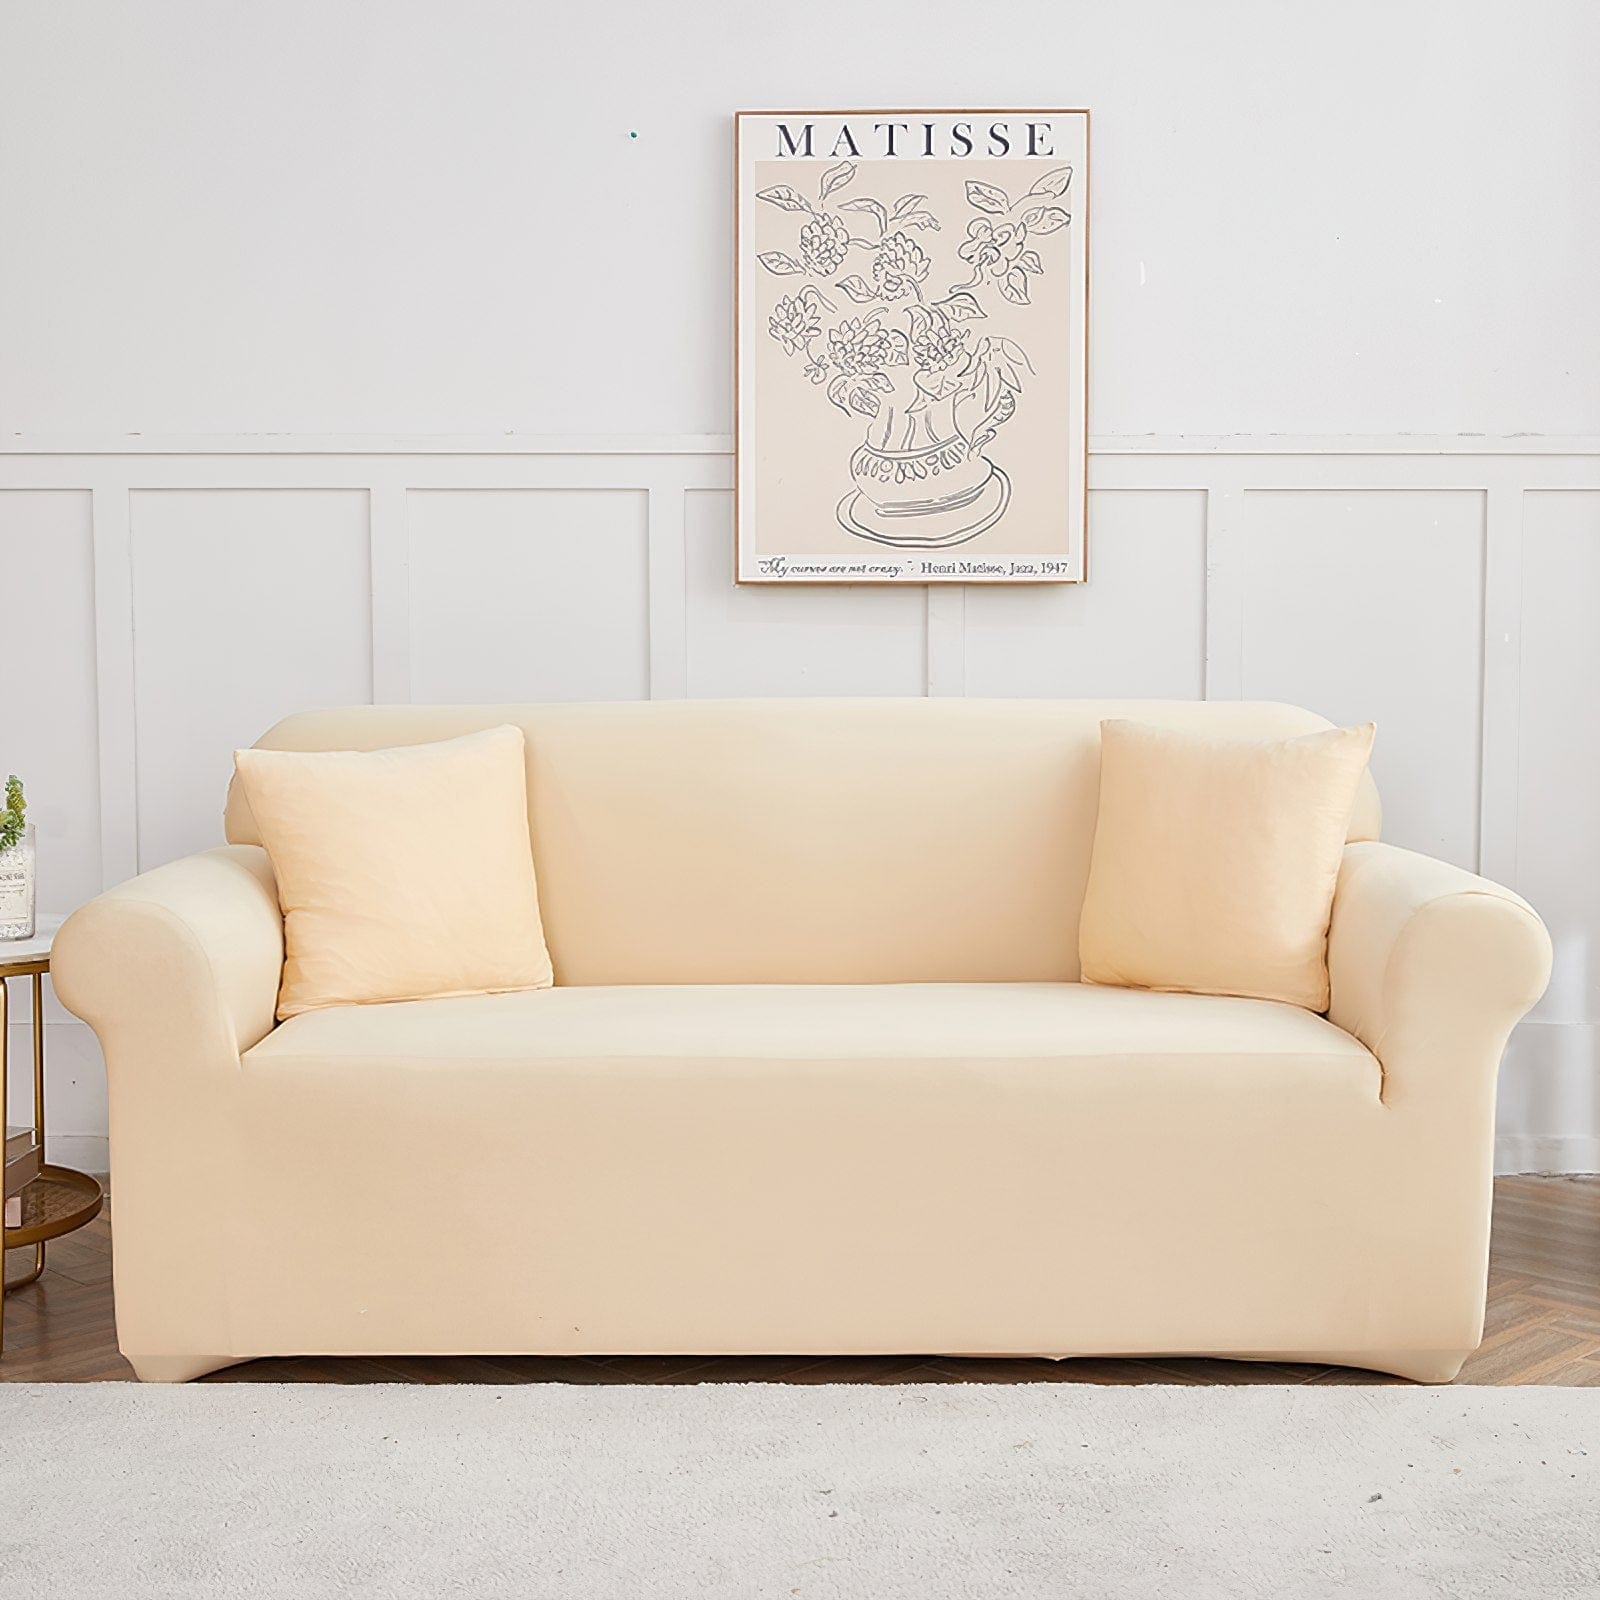 Beige - Extendable Armchair and Sofa Covers - The Sofa Cover House